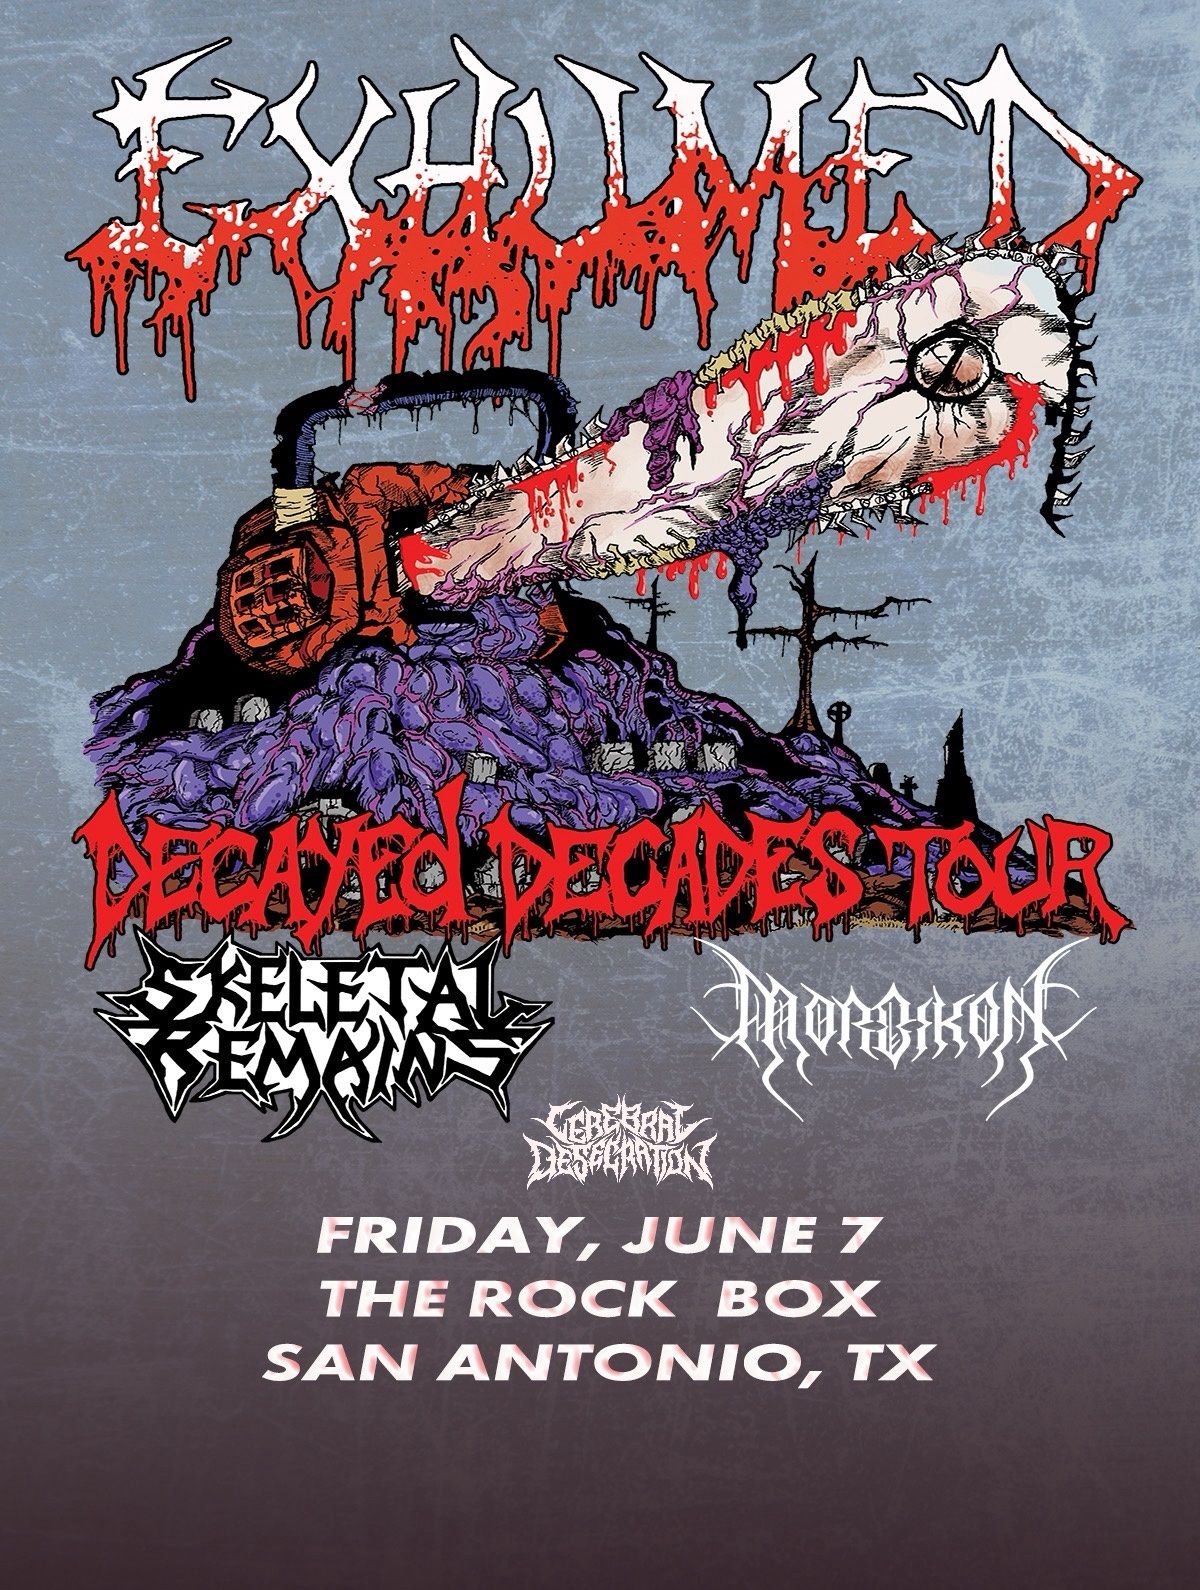 Exhumed at The Rock Box